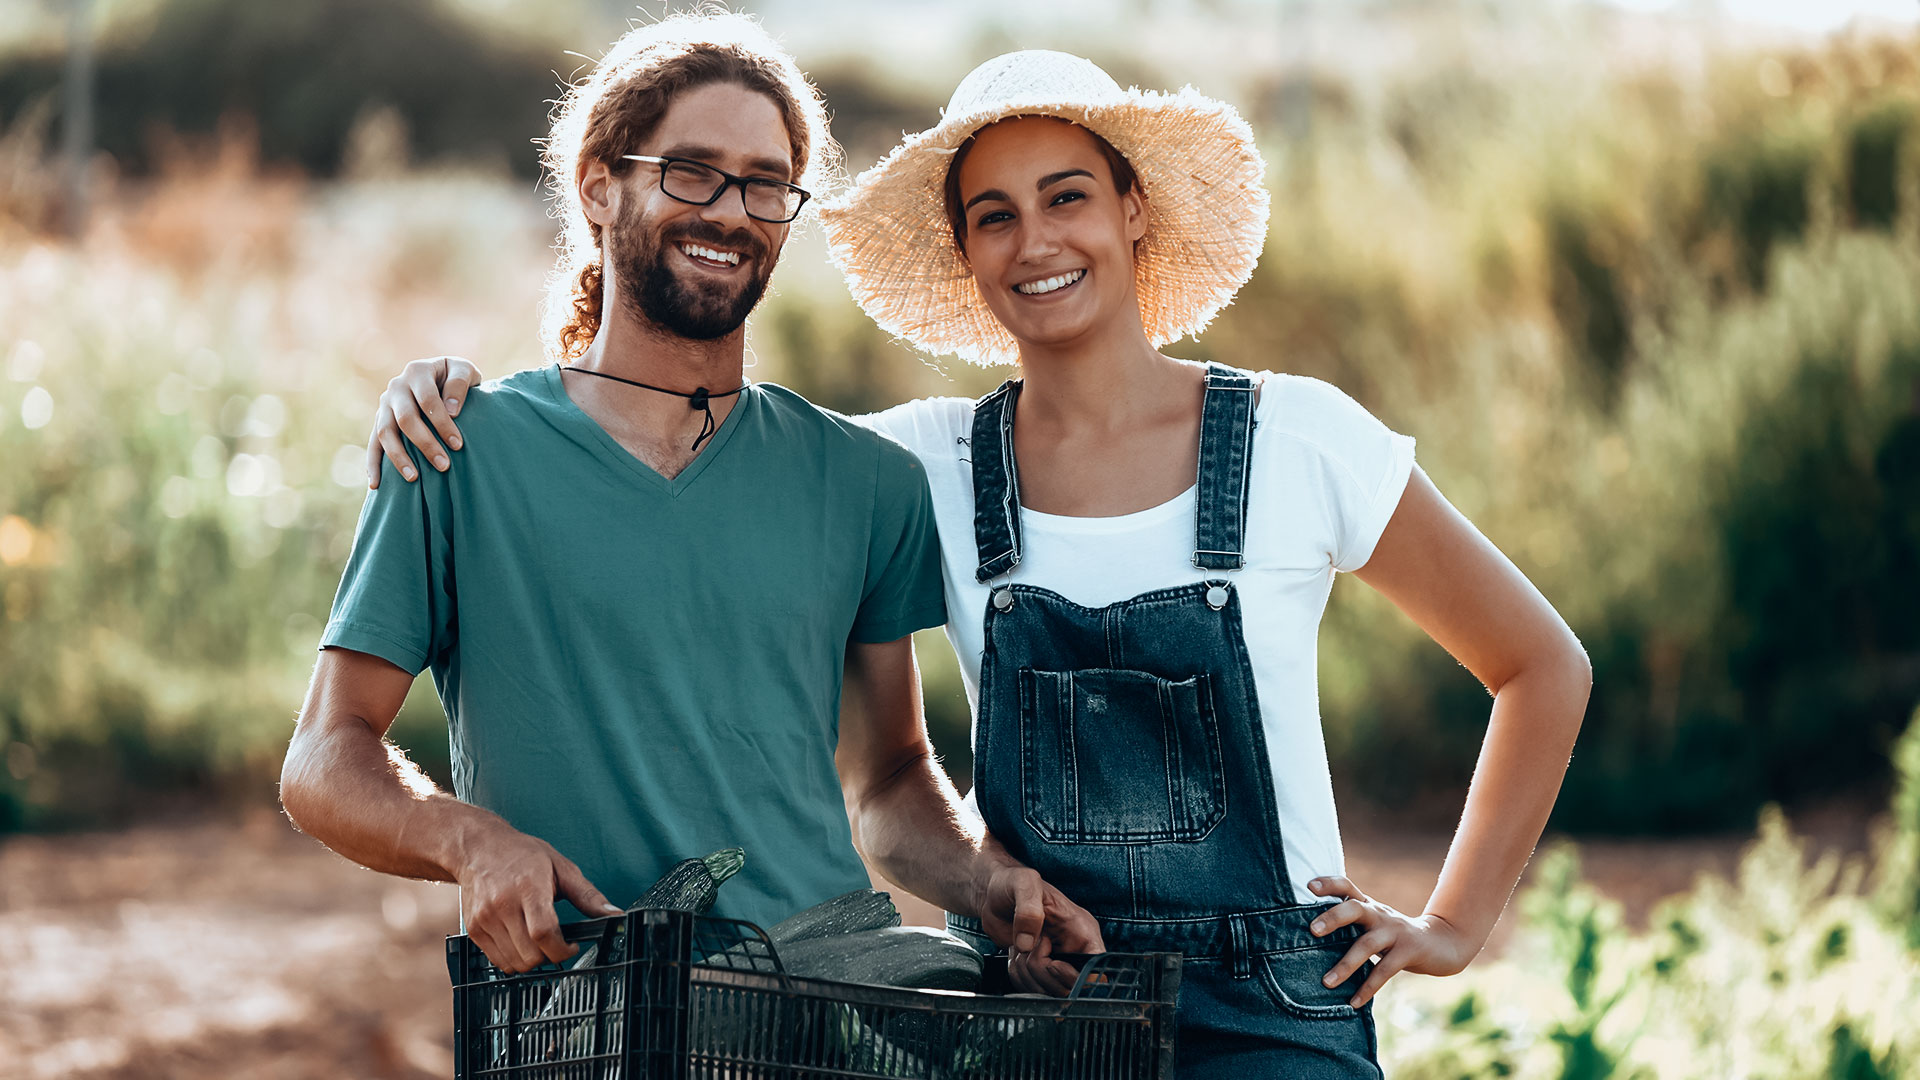 horticulturist-young-couple-harvesting-fresh-veget